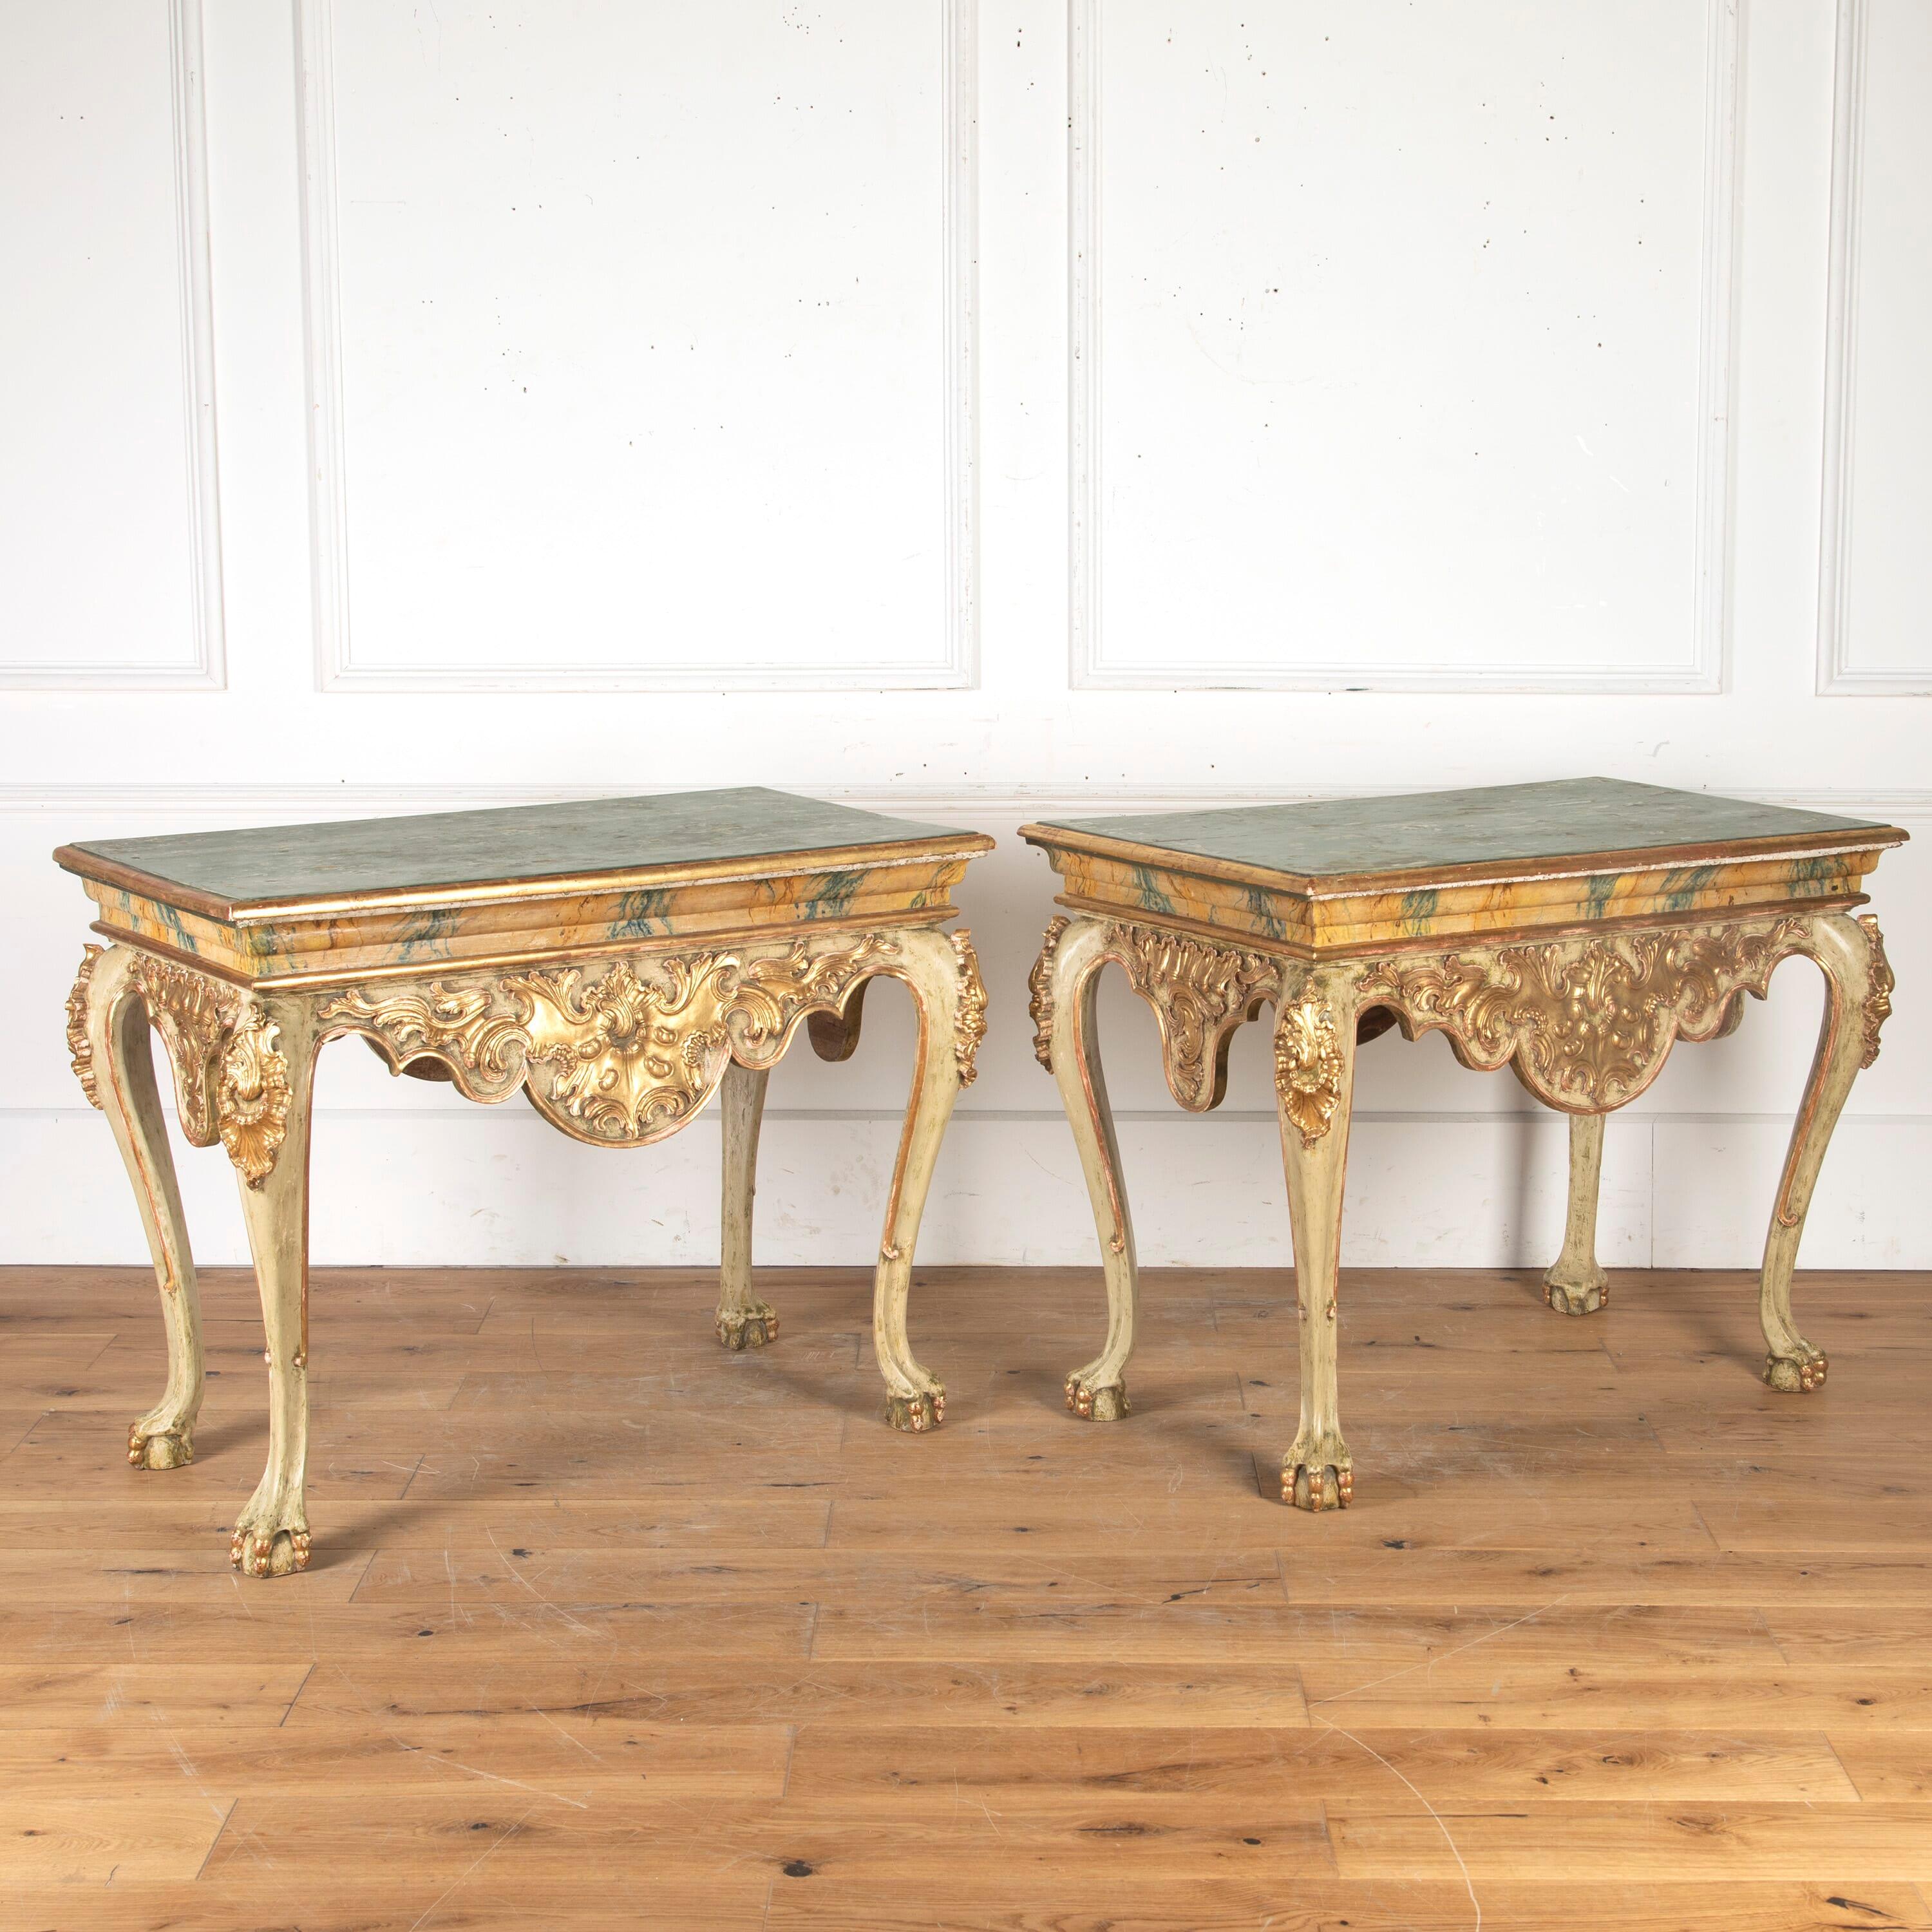 Stunning pair of Spanish 19th century console tables.

This pair feature exceptional carved and painted decoration throughout. The faux marble green top sits above an elaborate dipped frieze with extensive carved acanthus decoration.